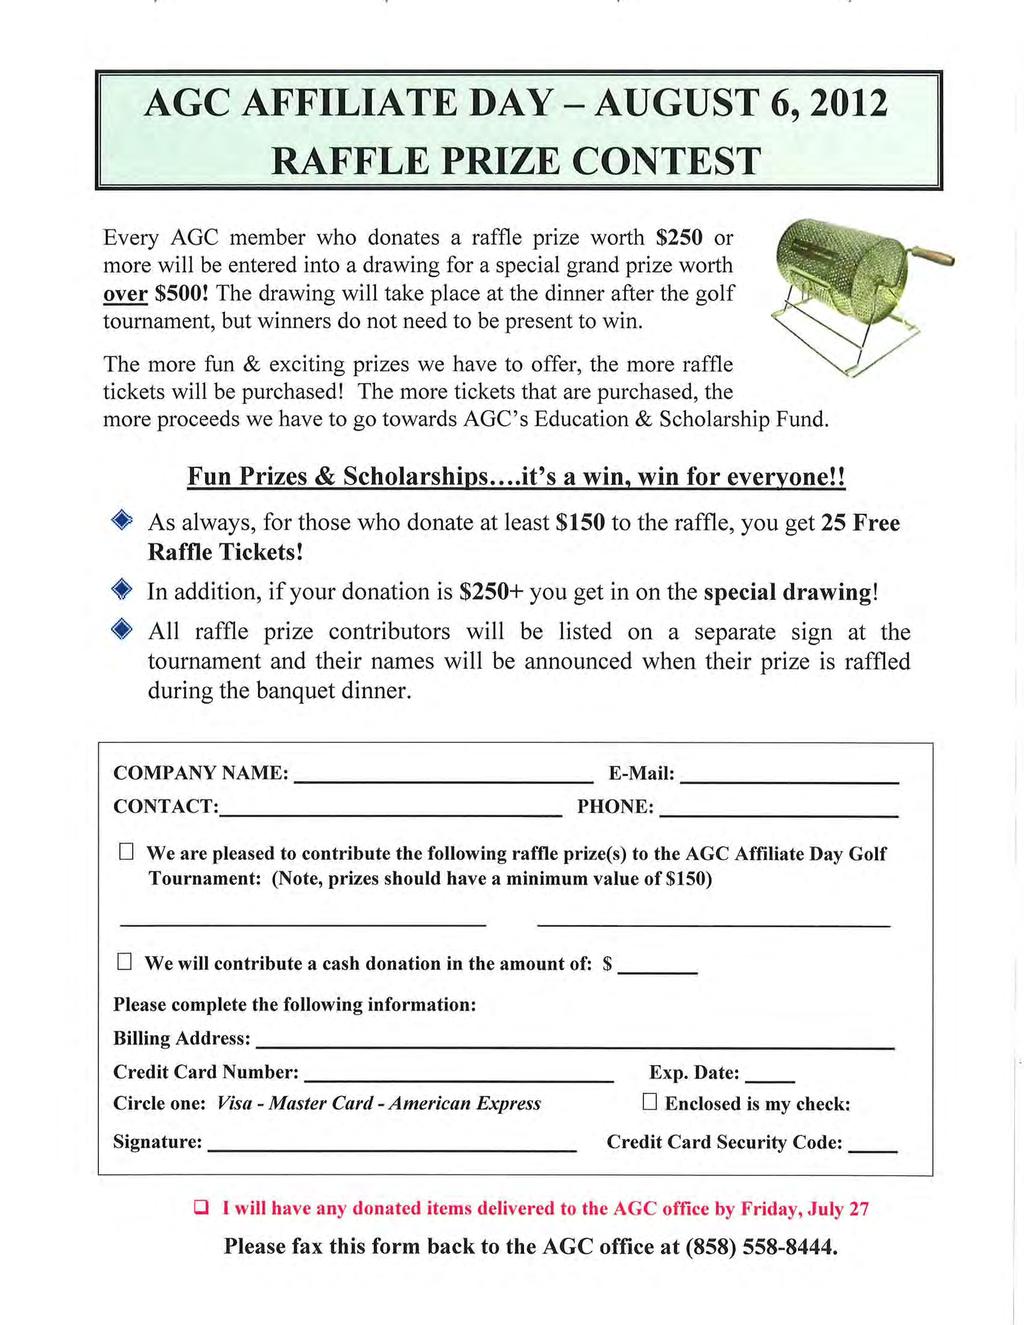 AGC AFFILIATE DAY - AUGUST 6, 2012 RAFFLE PRIZE CONTEST Every AGe member who donates a raffle prize worth $250 or more will be entered into a drawing for a special grand prize worth over $500!